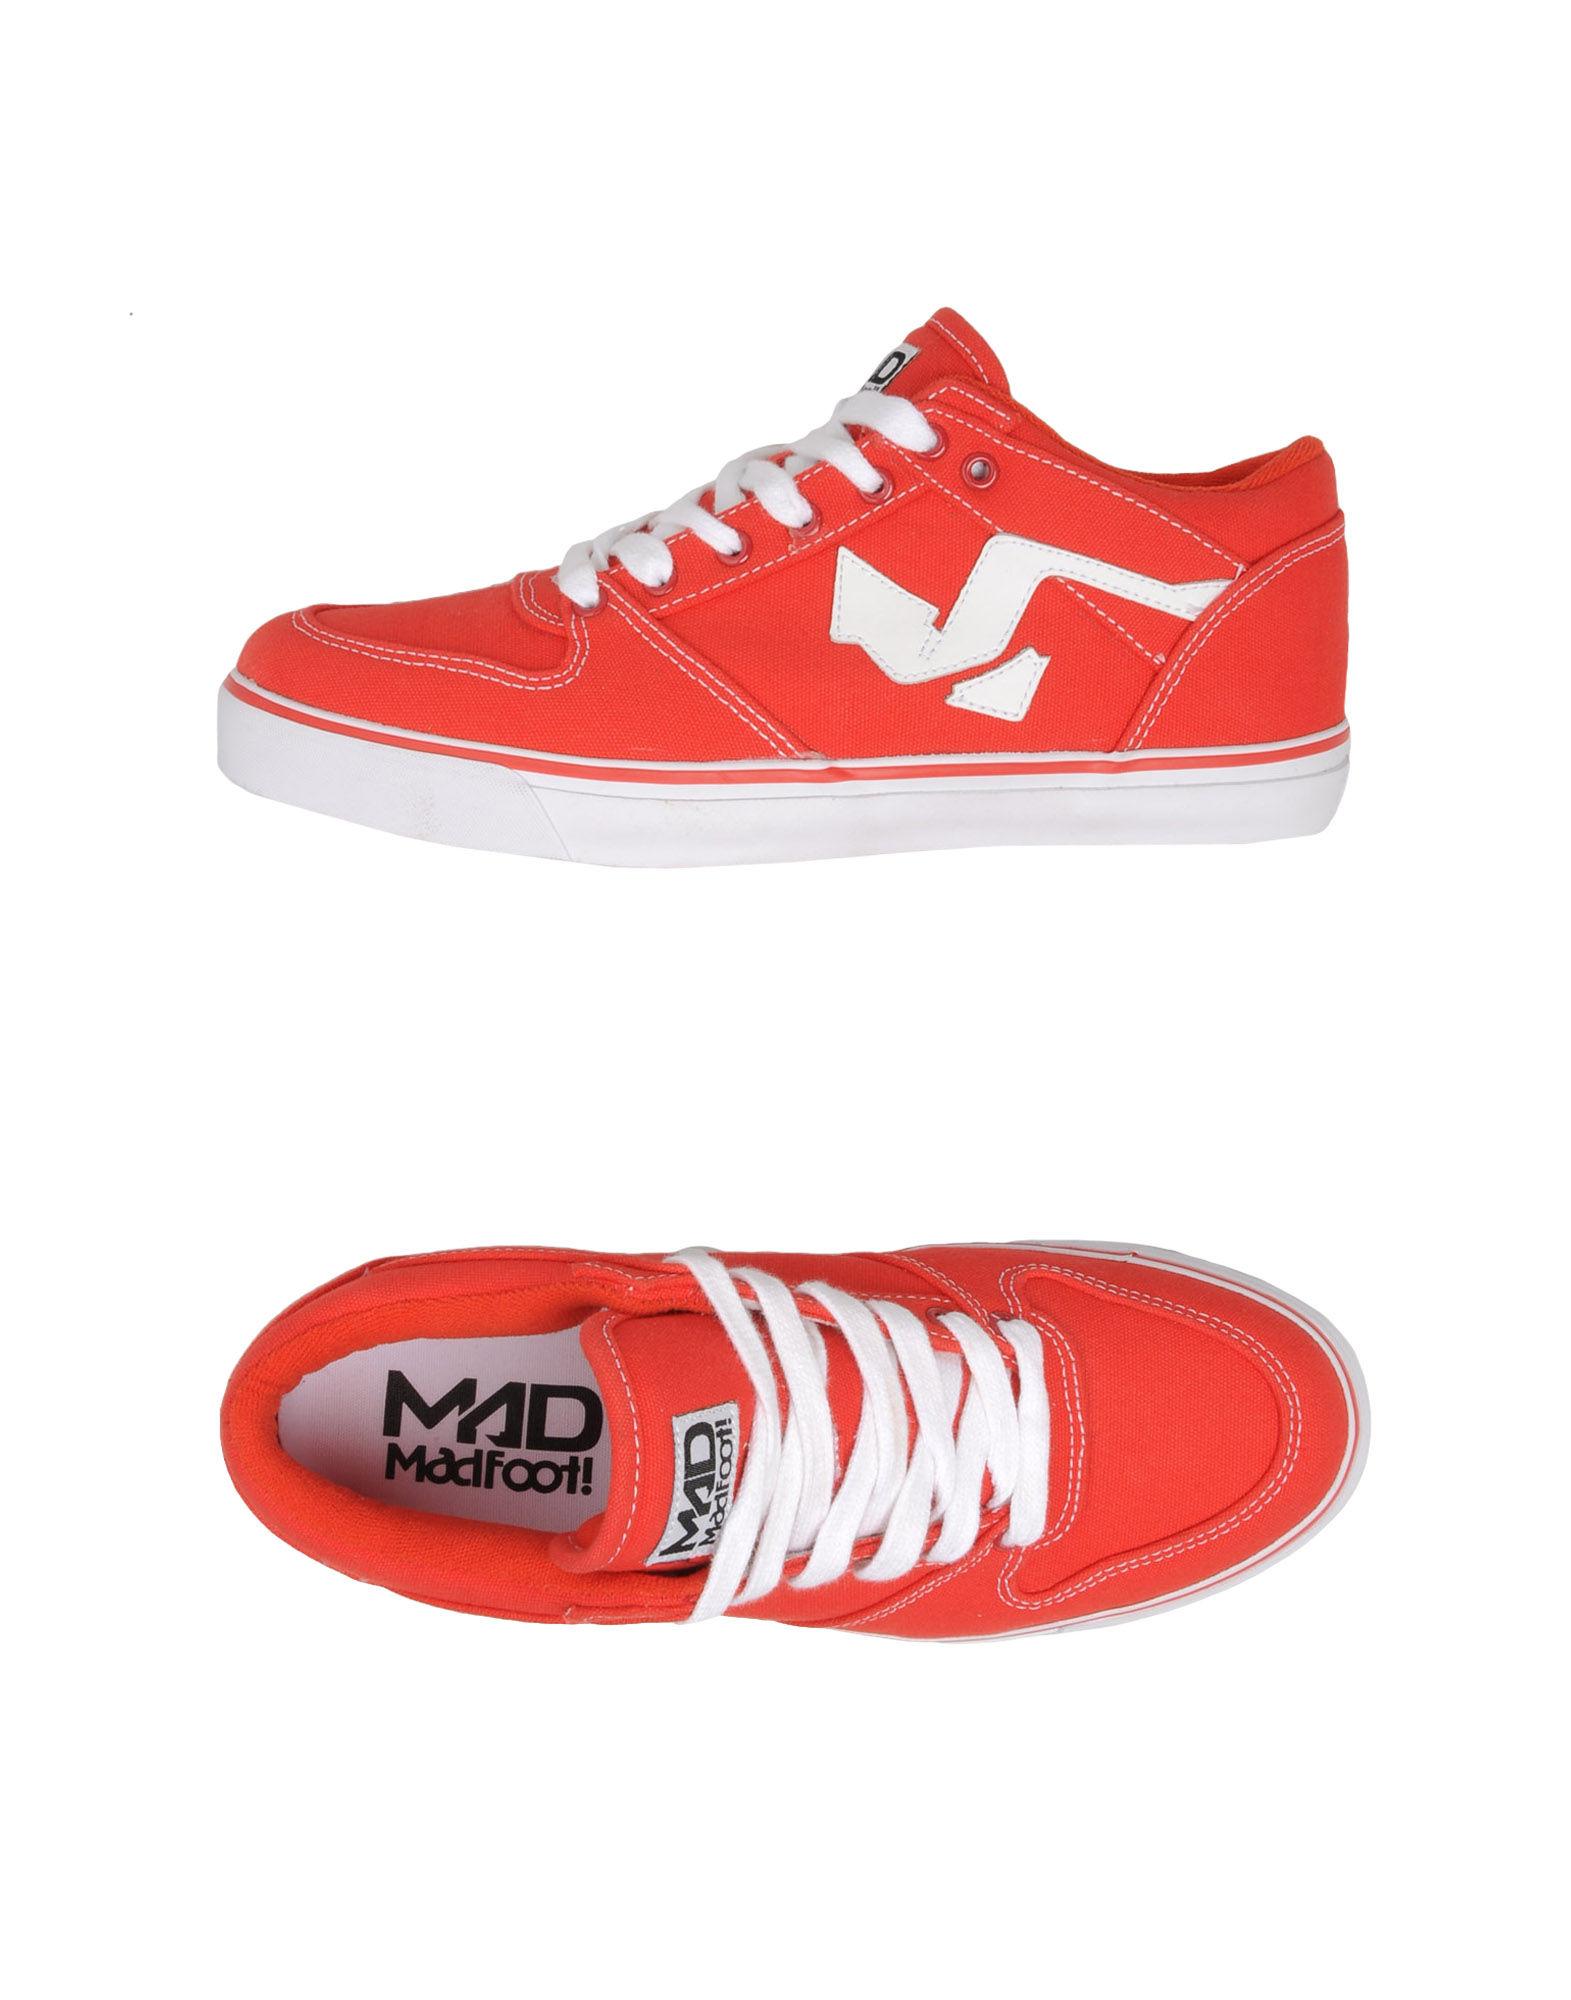 Foto Mad Madfoot! Sneakers Hombre Coral